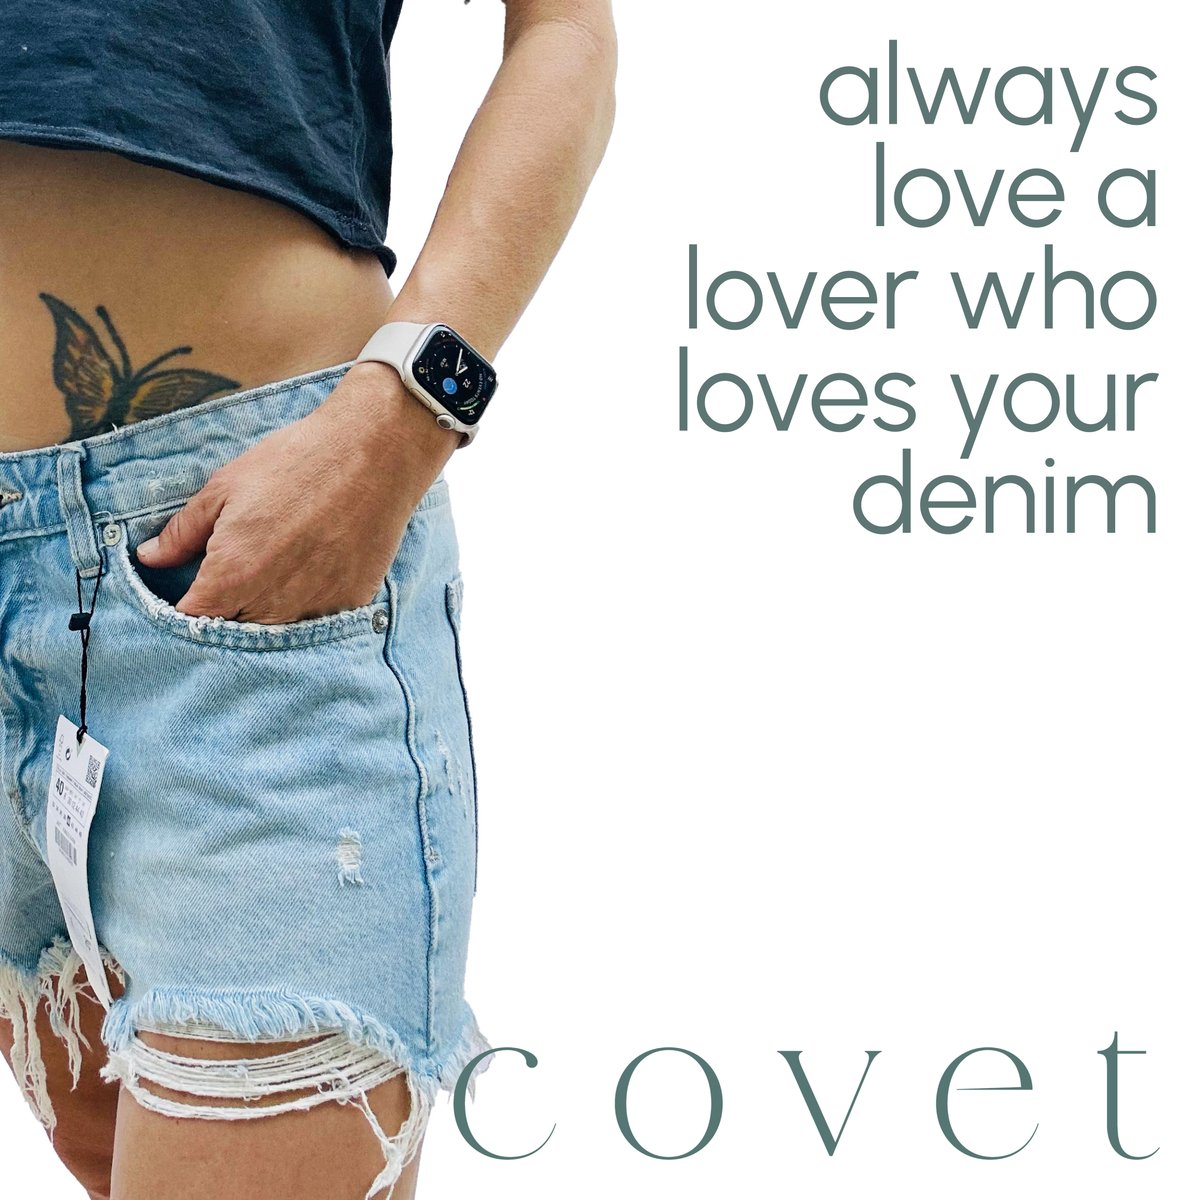 👖 New with Tags!! Zara High Rise Jean Cut-off Shorts, Size UK12, only £13!! 👖 covetclothing.com  #cutoffshorts #covetclothing #covet #betterthannew #betteronyou #shopsecondhand #circularfashion